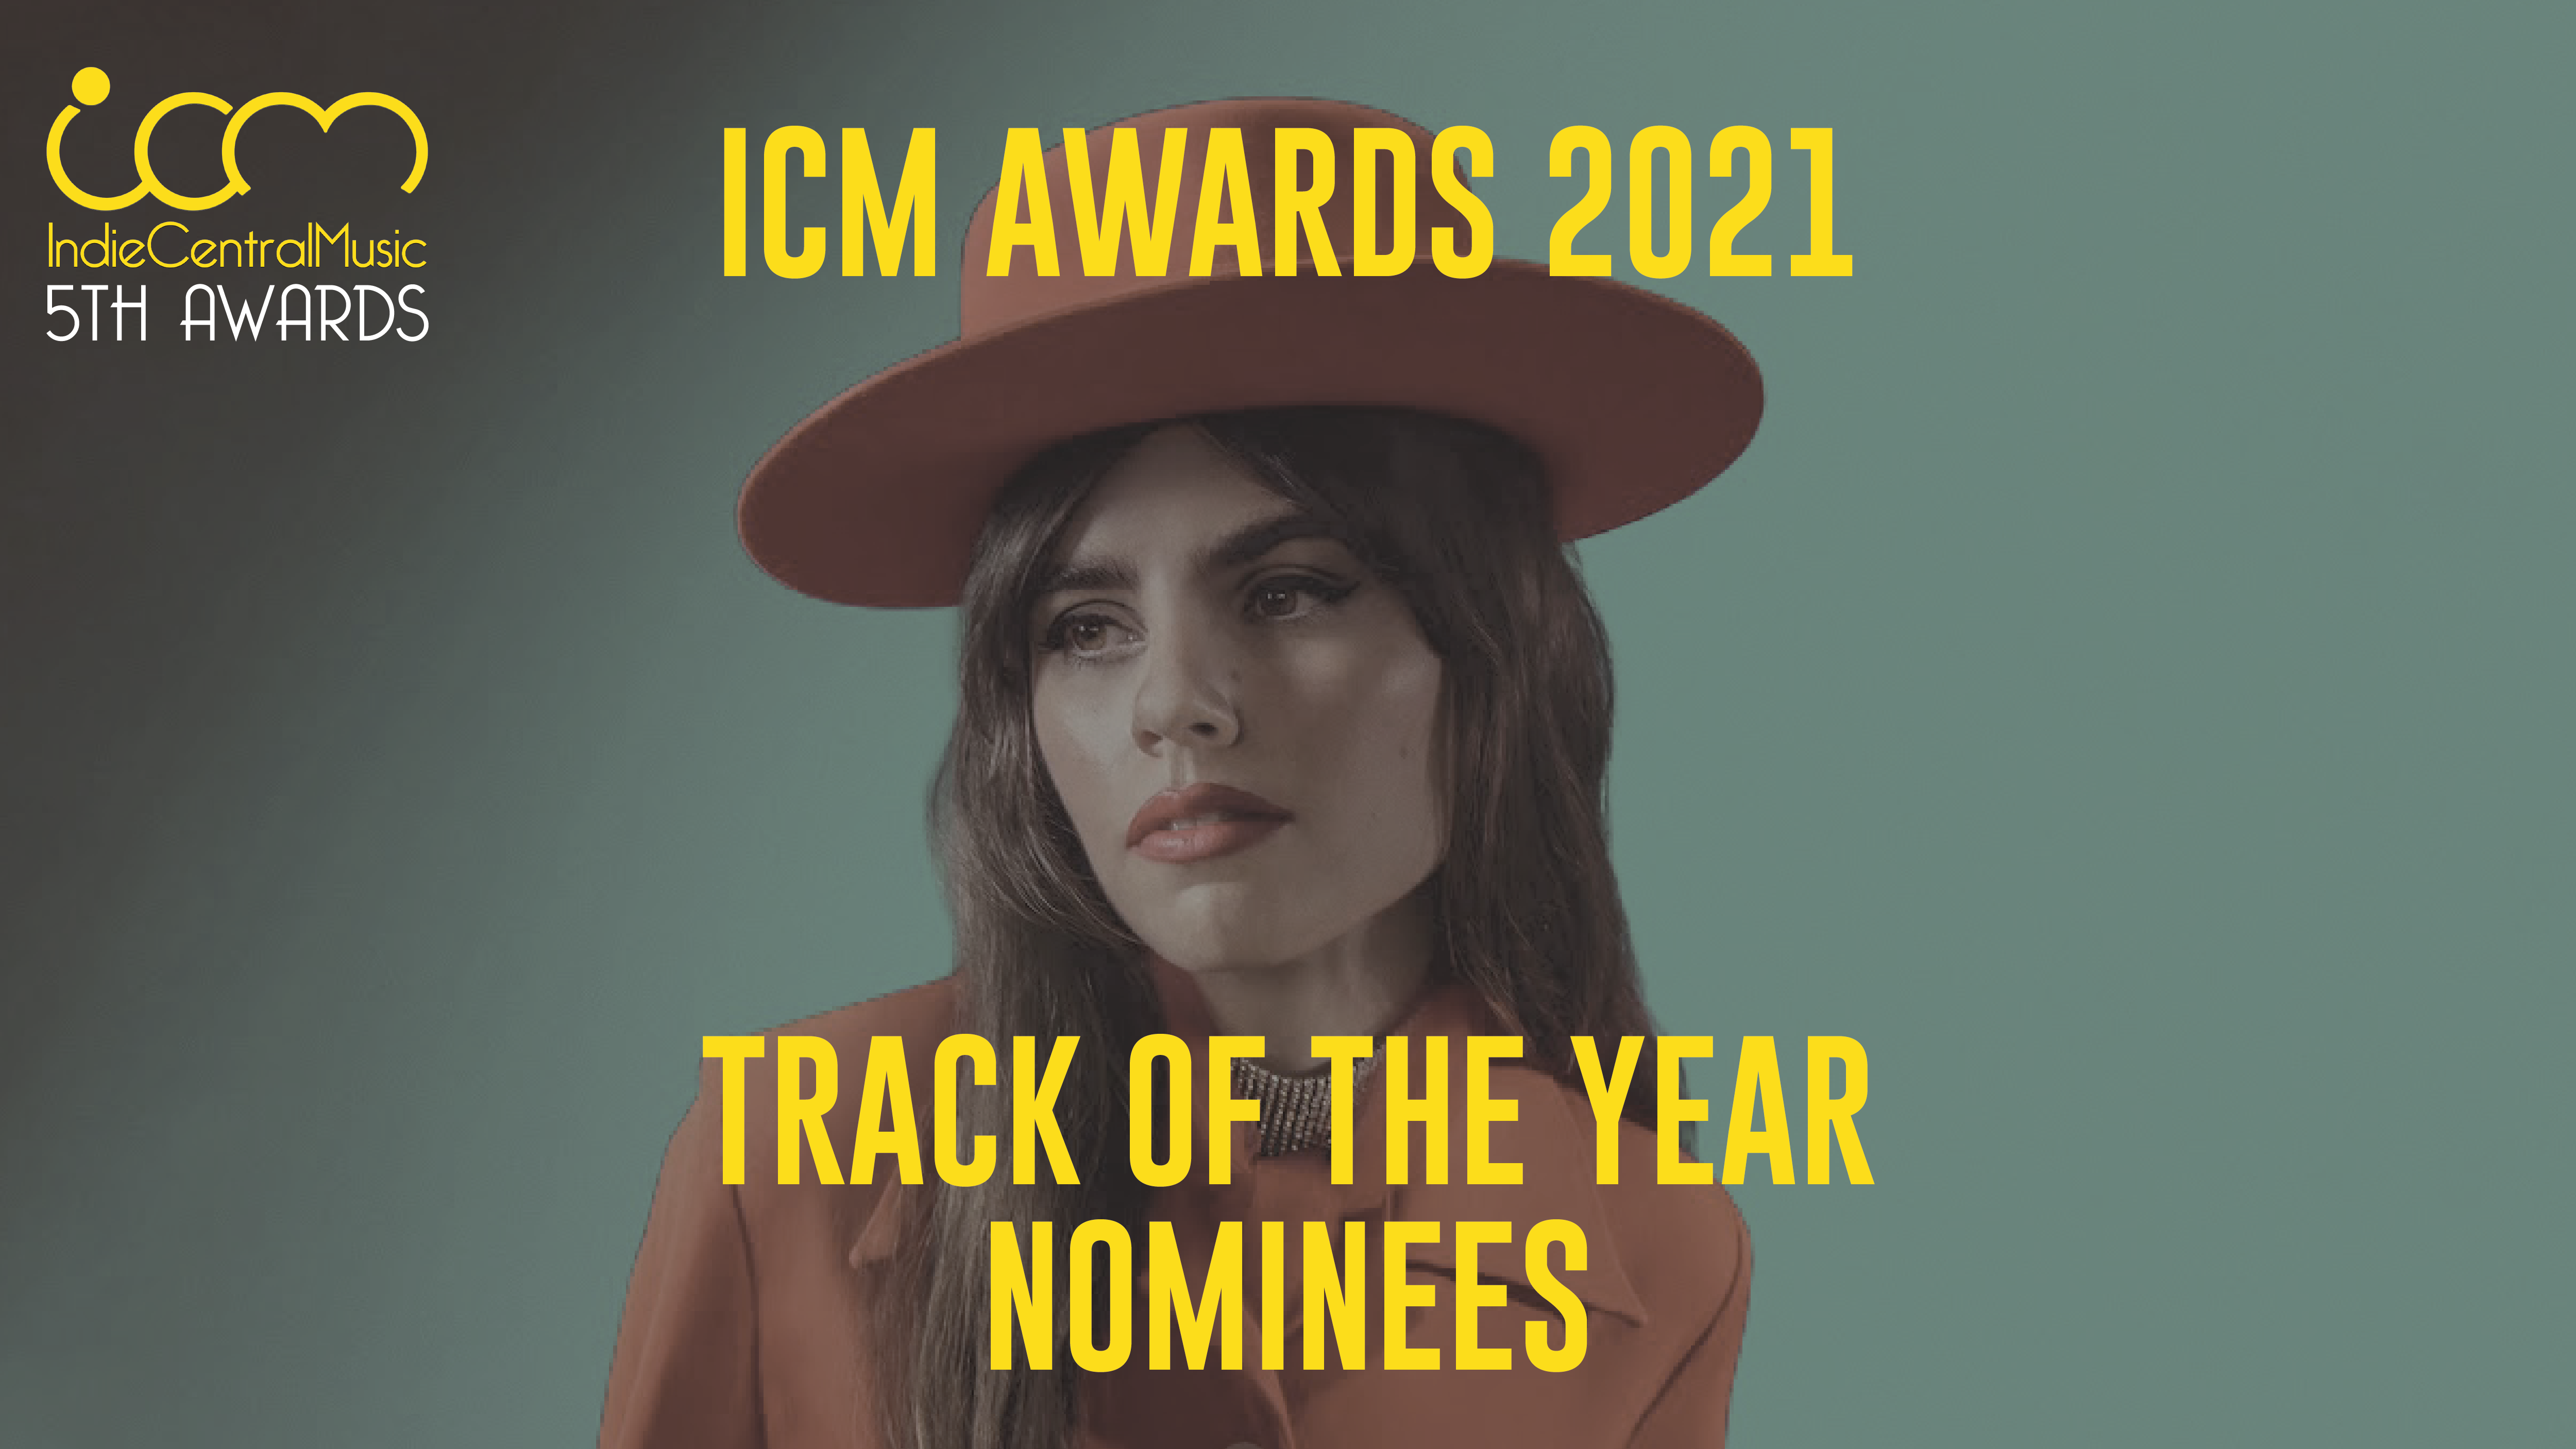 ICM Awards 2021 Track of the Year nominees IndieCentralMusic